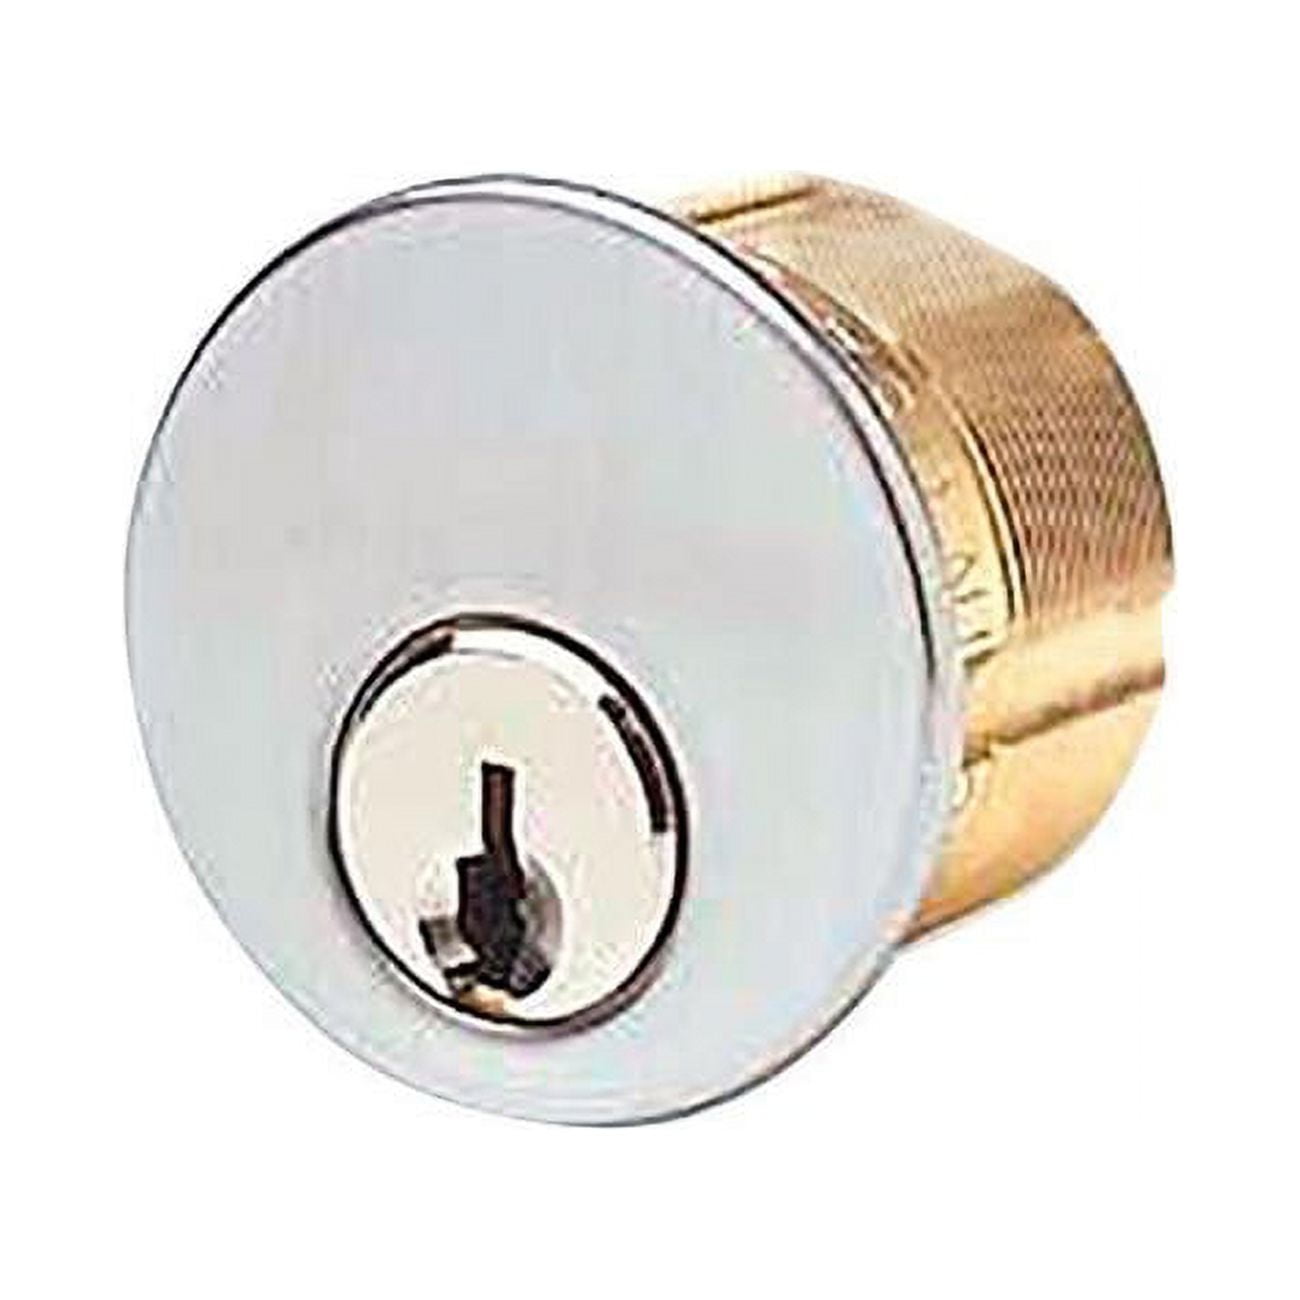 5001731 Kw9 Brass Mortise Cylinder Keyed Differently - Case Of 10